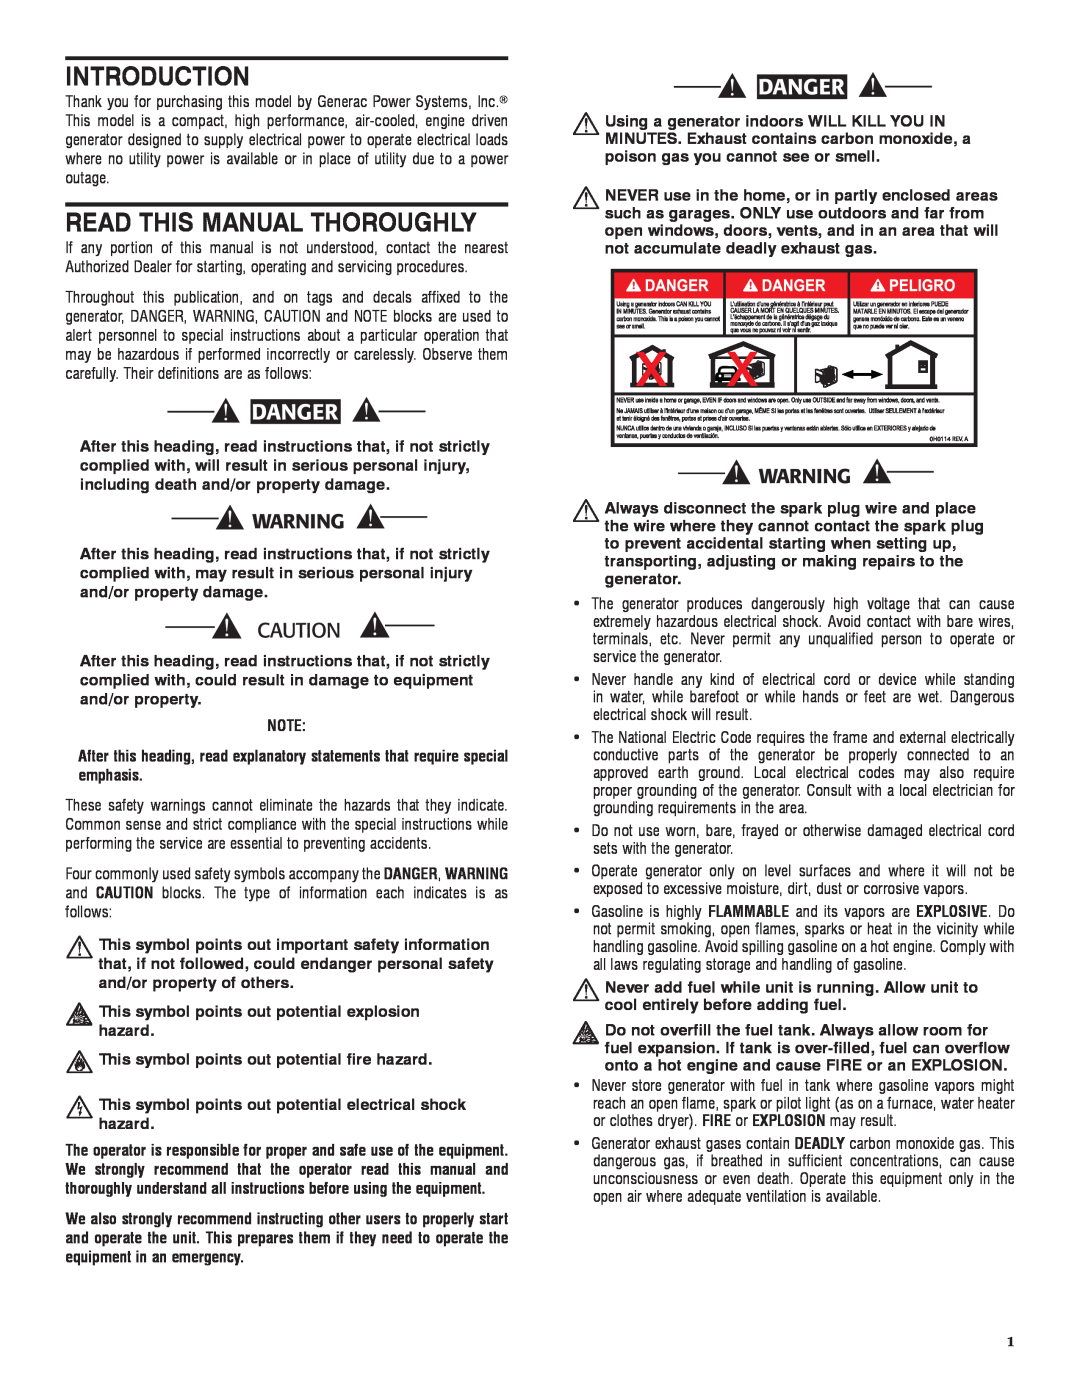 Sears 005734-0 Introduction, Read This Manual Thoroughly, Danger,  This symbol points out potential explosion hazard 